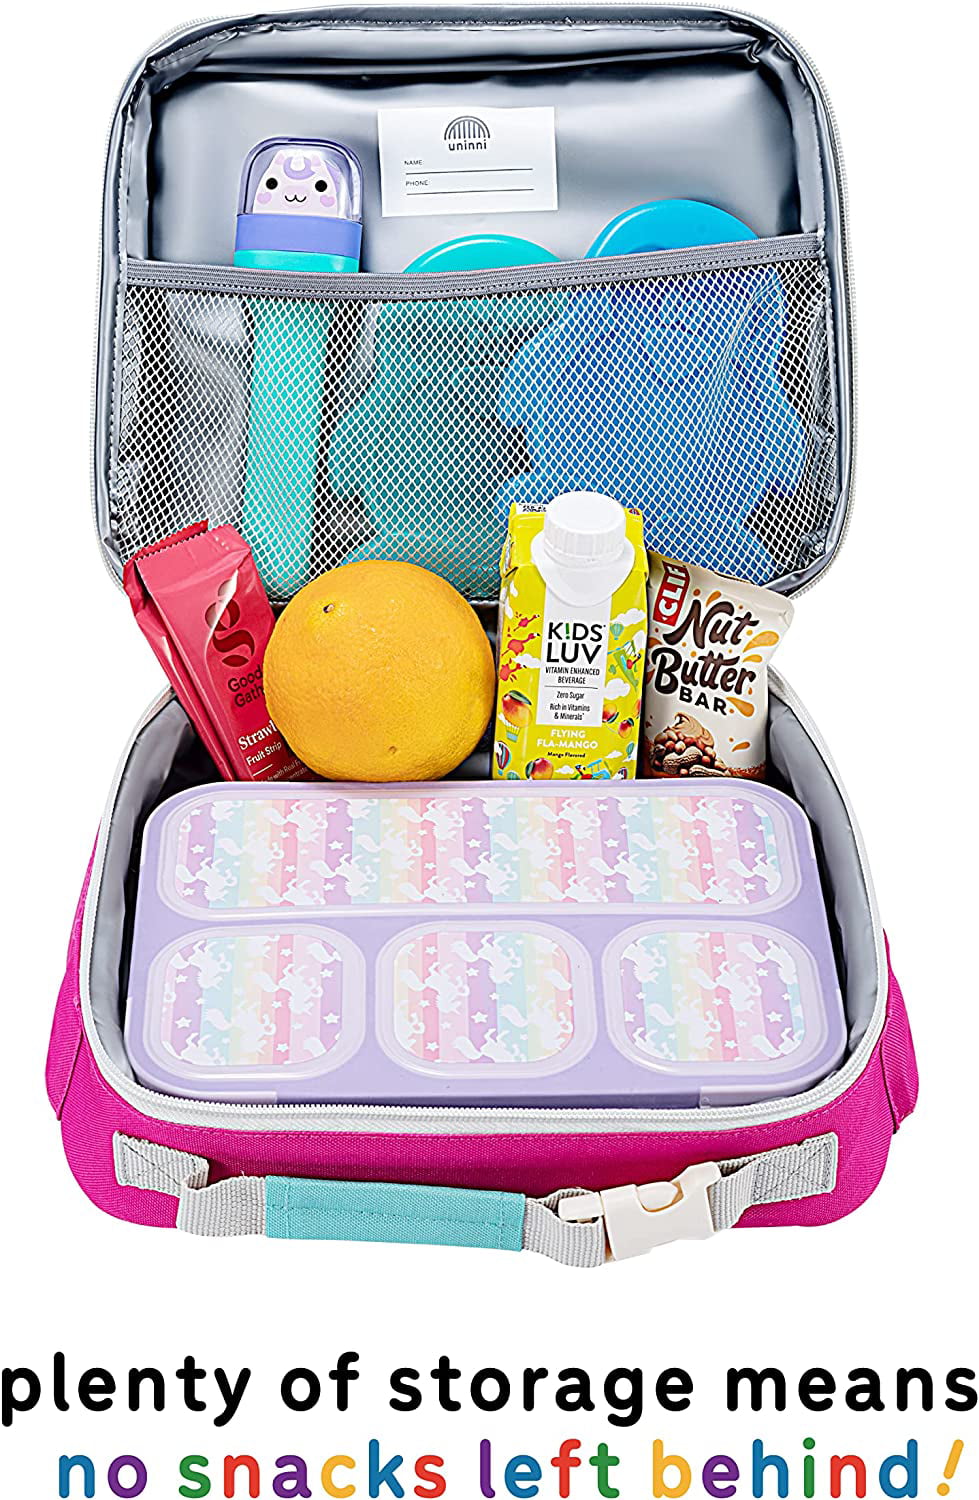 Lunch Bags Kids by Snack Attack Insulated Lunch Boxes Bag Girls Boys, –